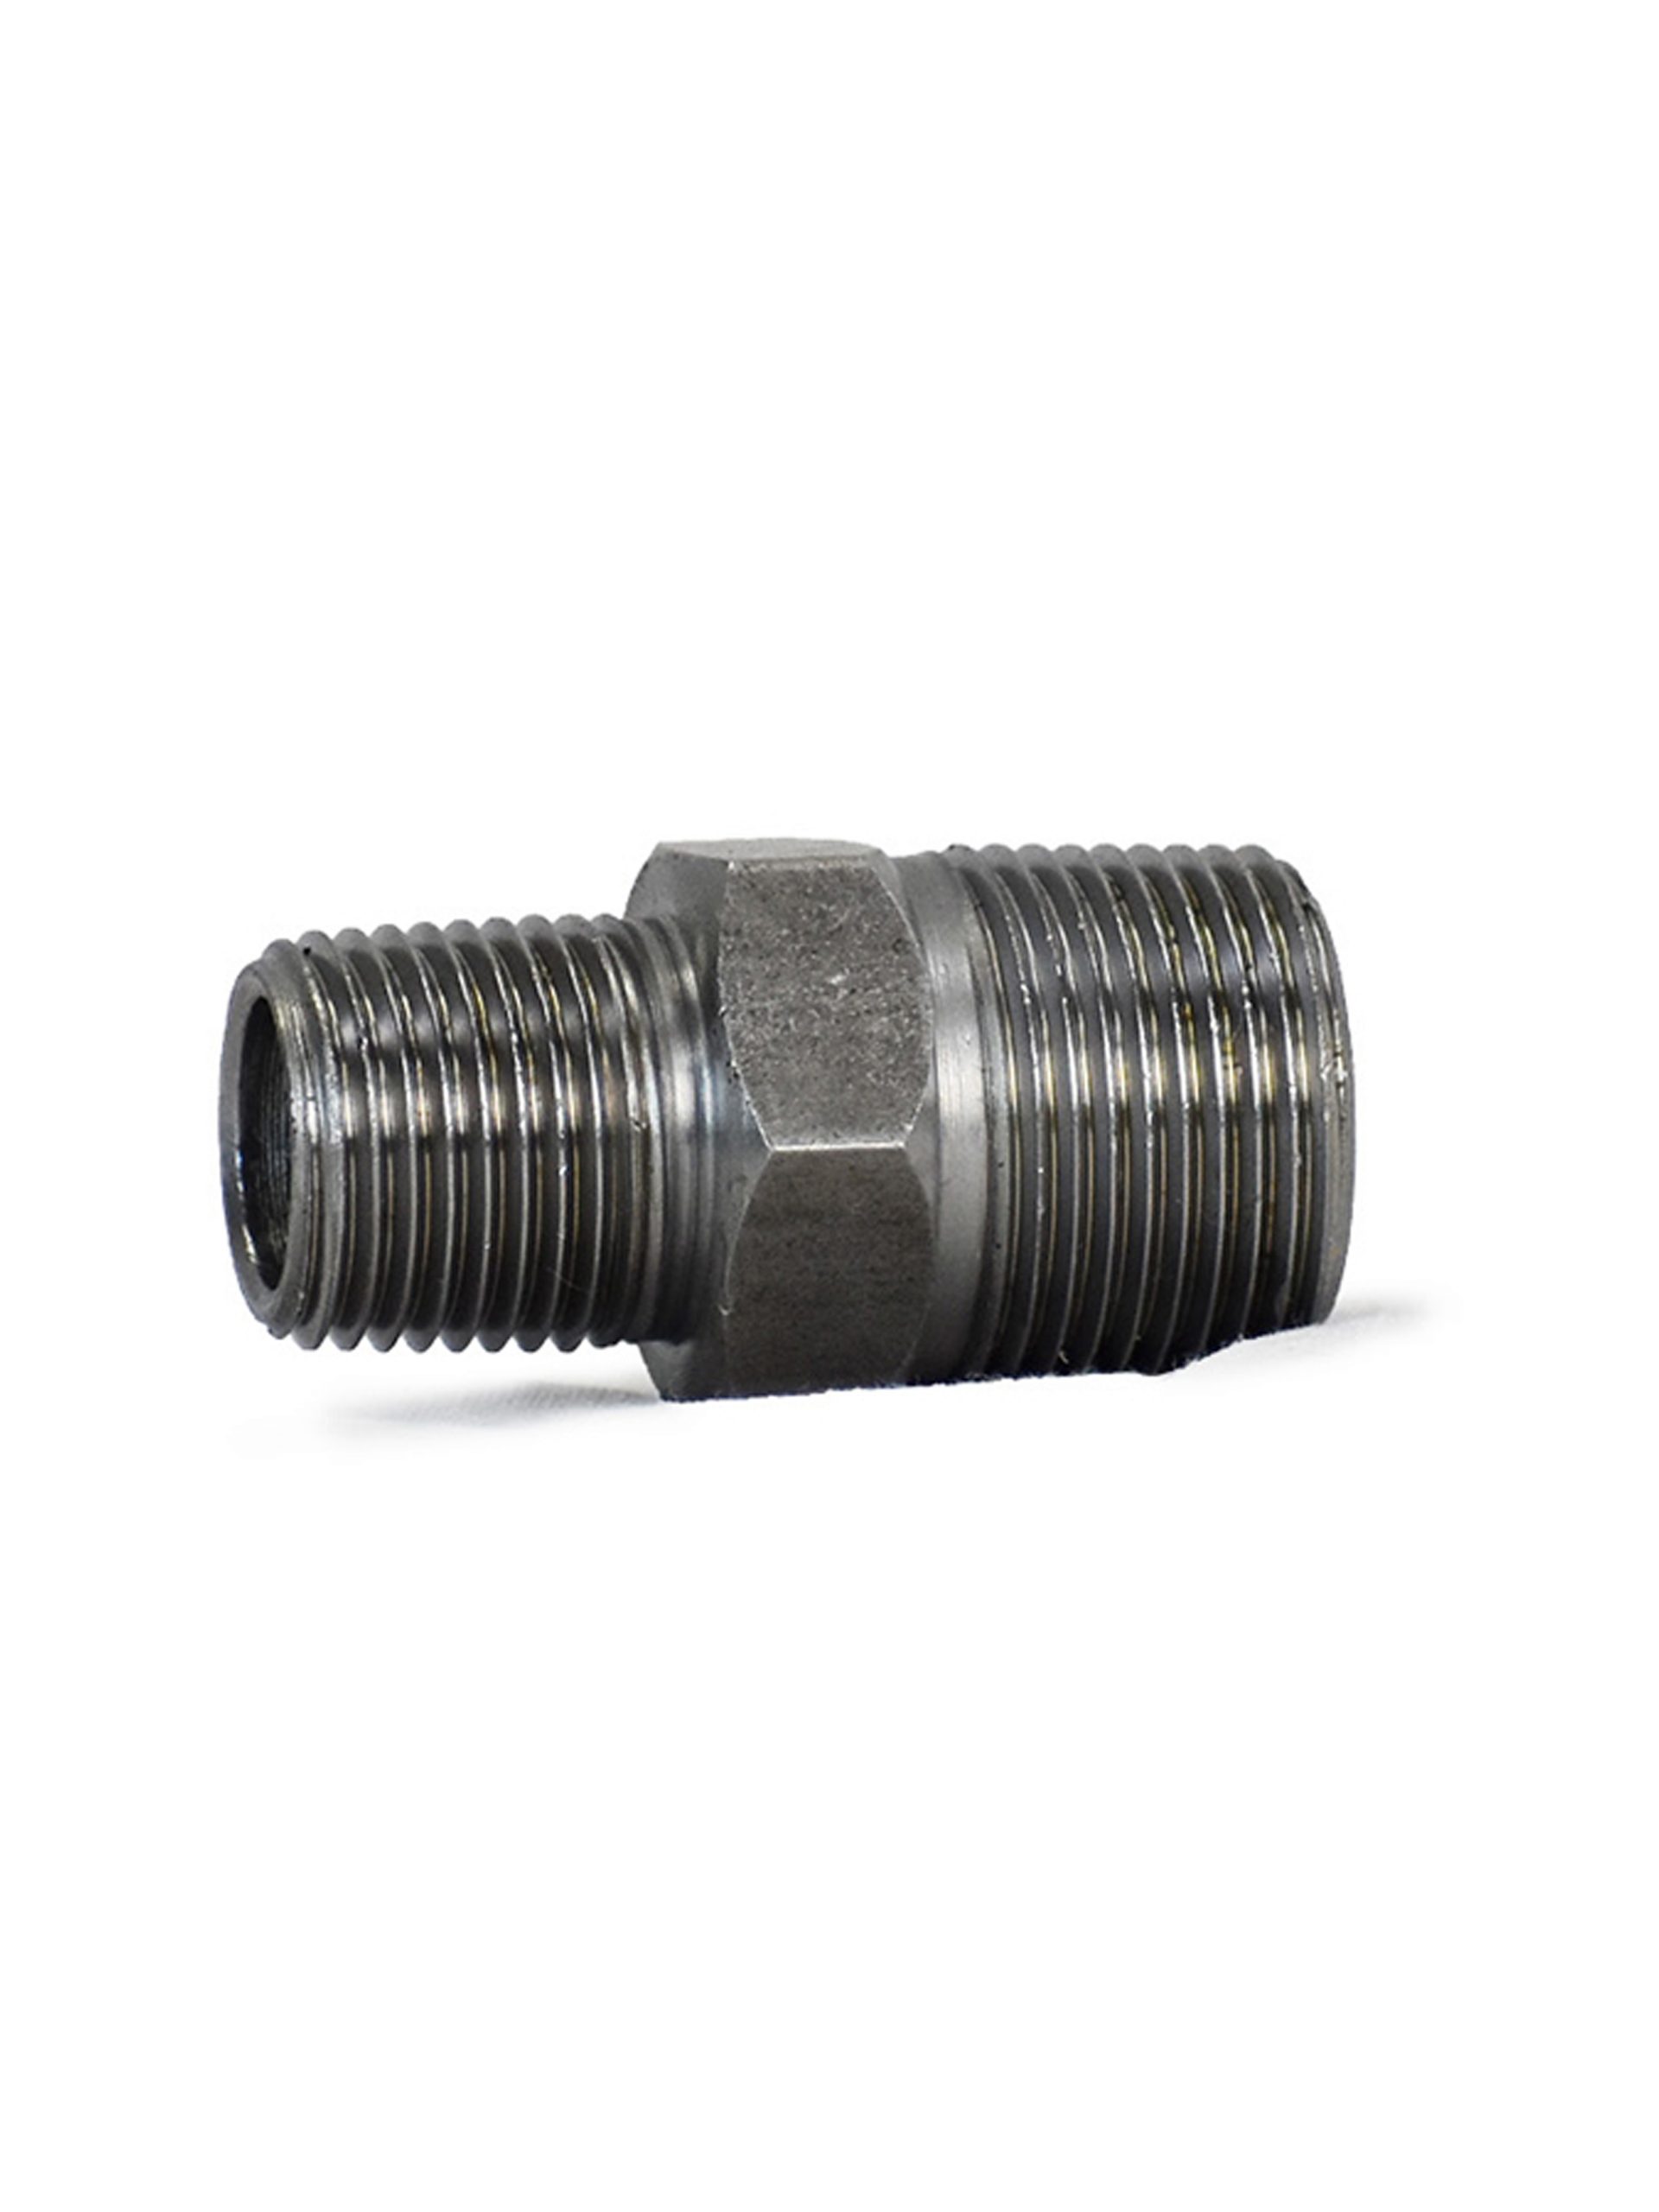 FORGED STEEL REDUCER HEX NIPPLE 1/2 Inches X 3/8 Inches CLASS 3000 from Gas Equipment Company Llc Abu Dhabi, UNITED ARAB EMIRATES